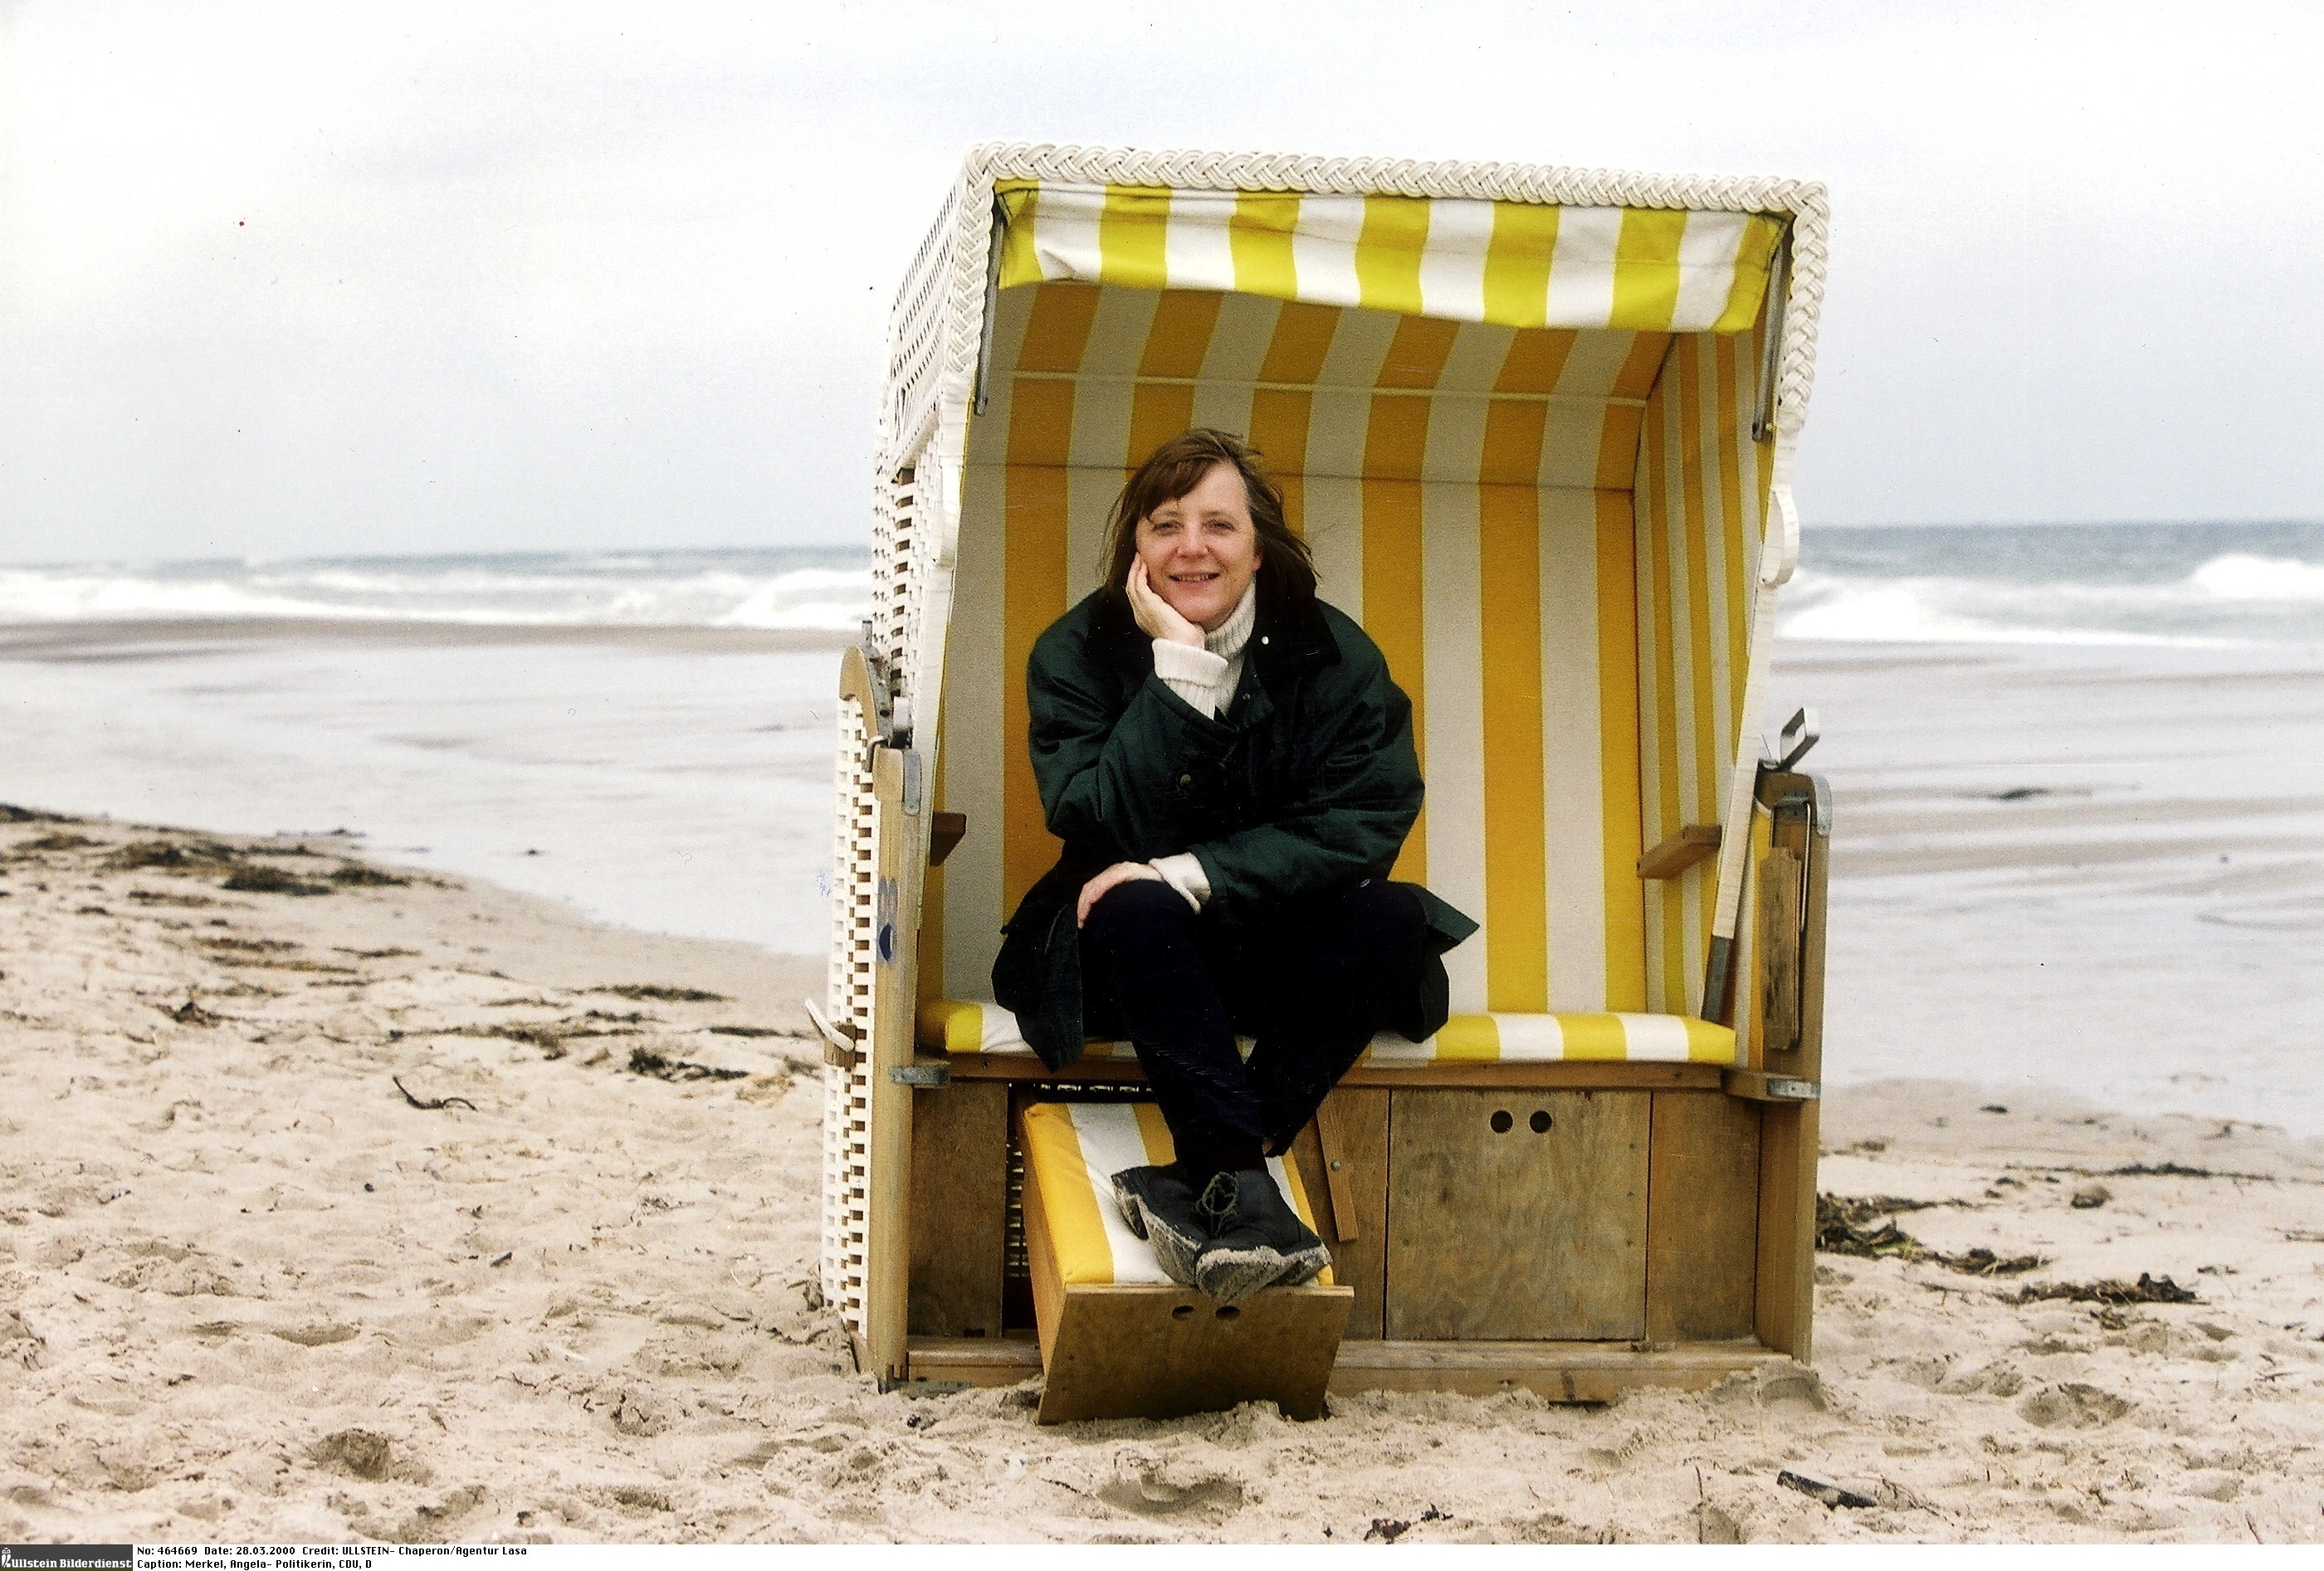 Angela Merkel in a beach chair at the Baltic Sea, in Germany in 2000.